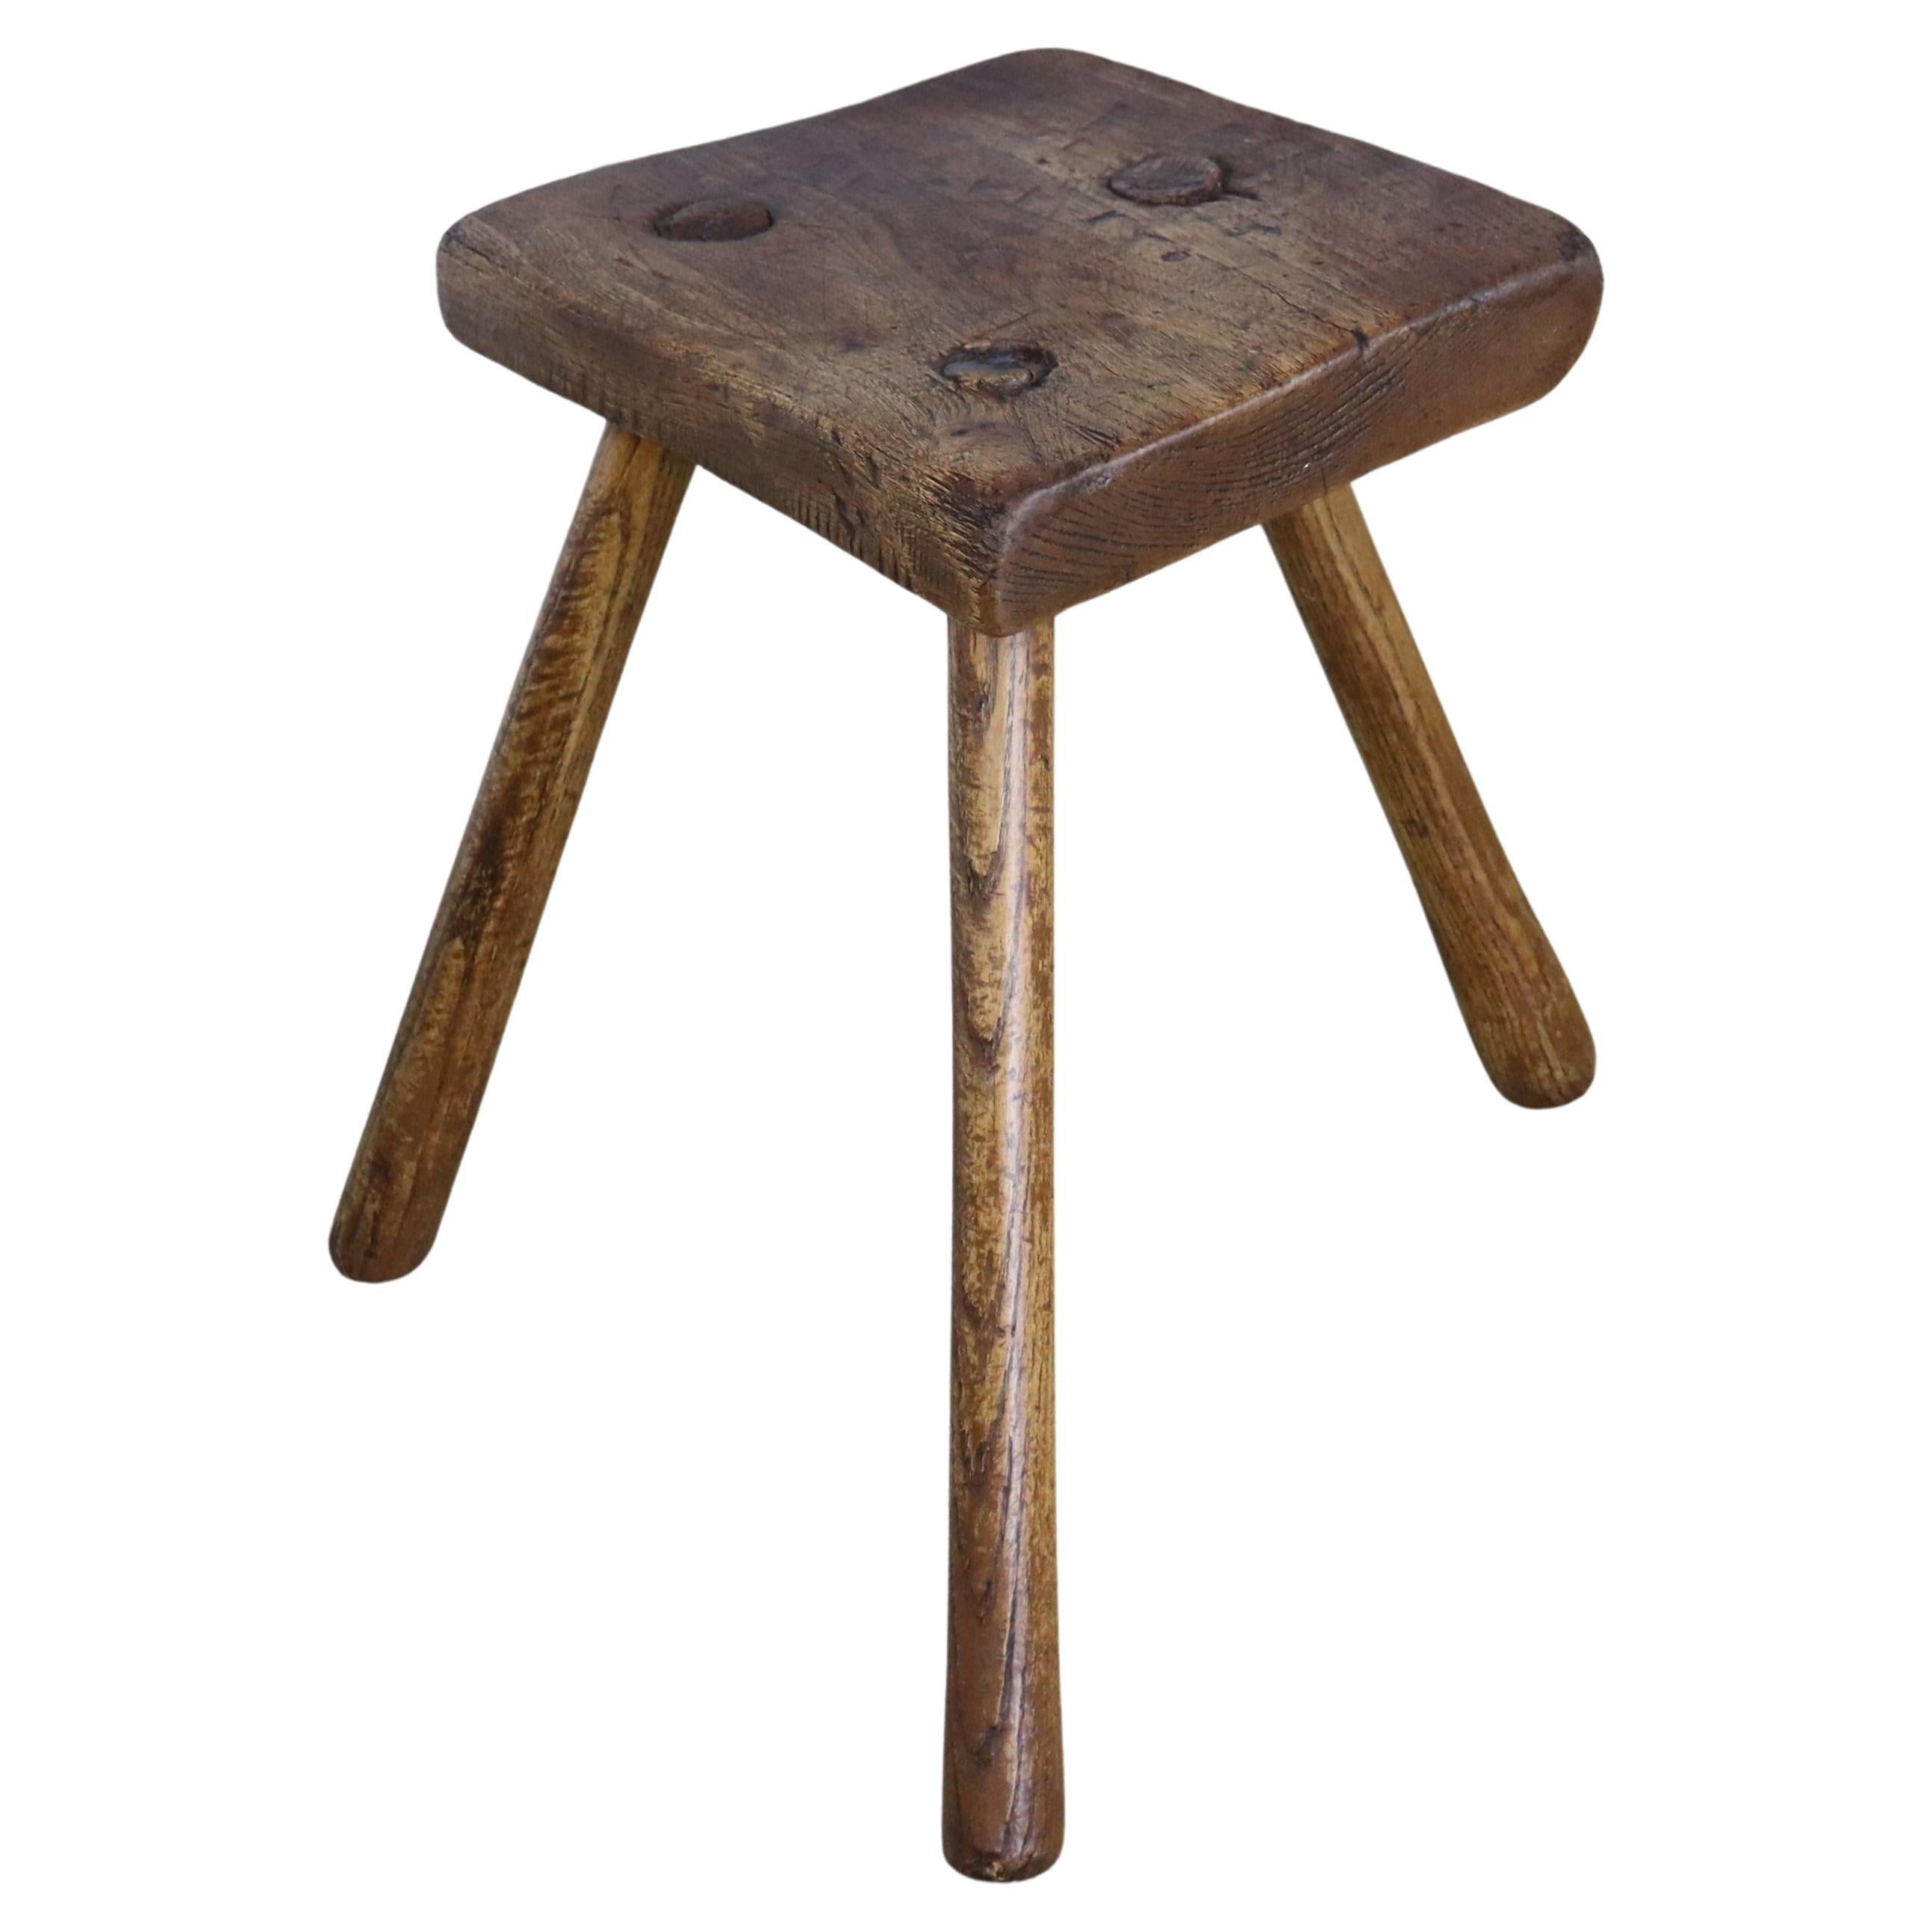 Who invented the milking stool?